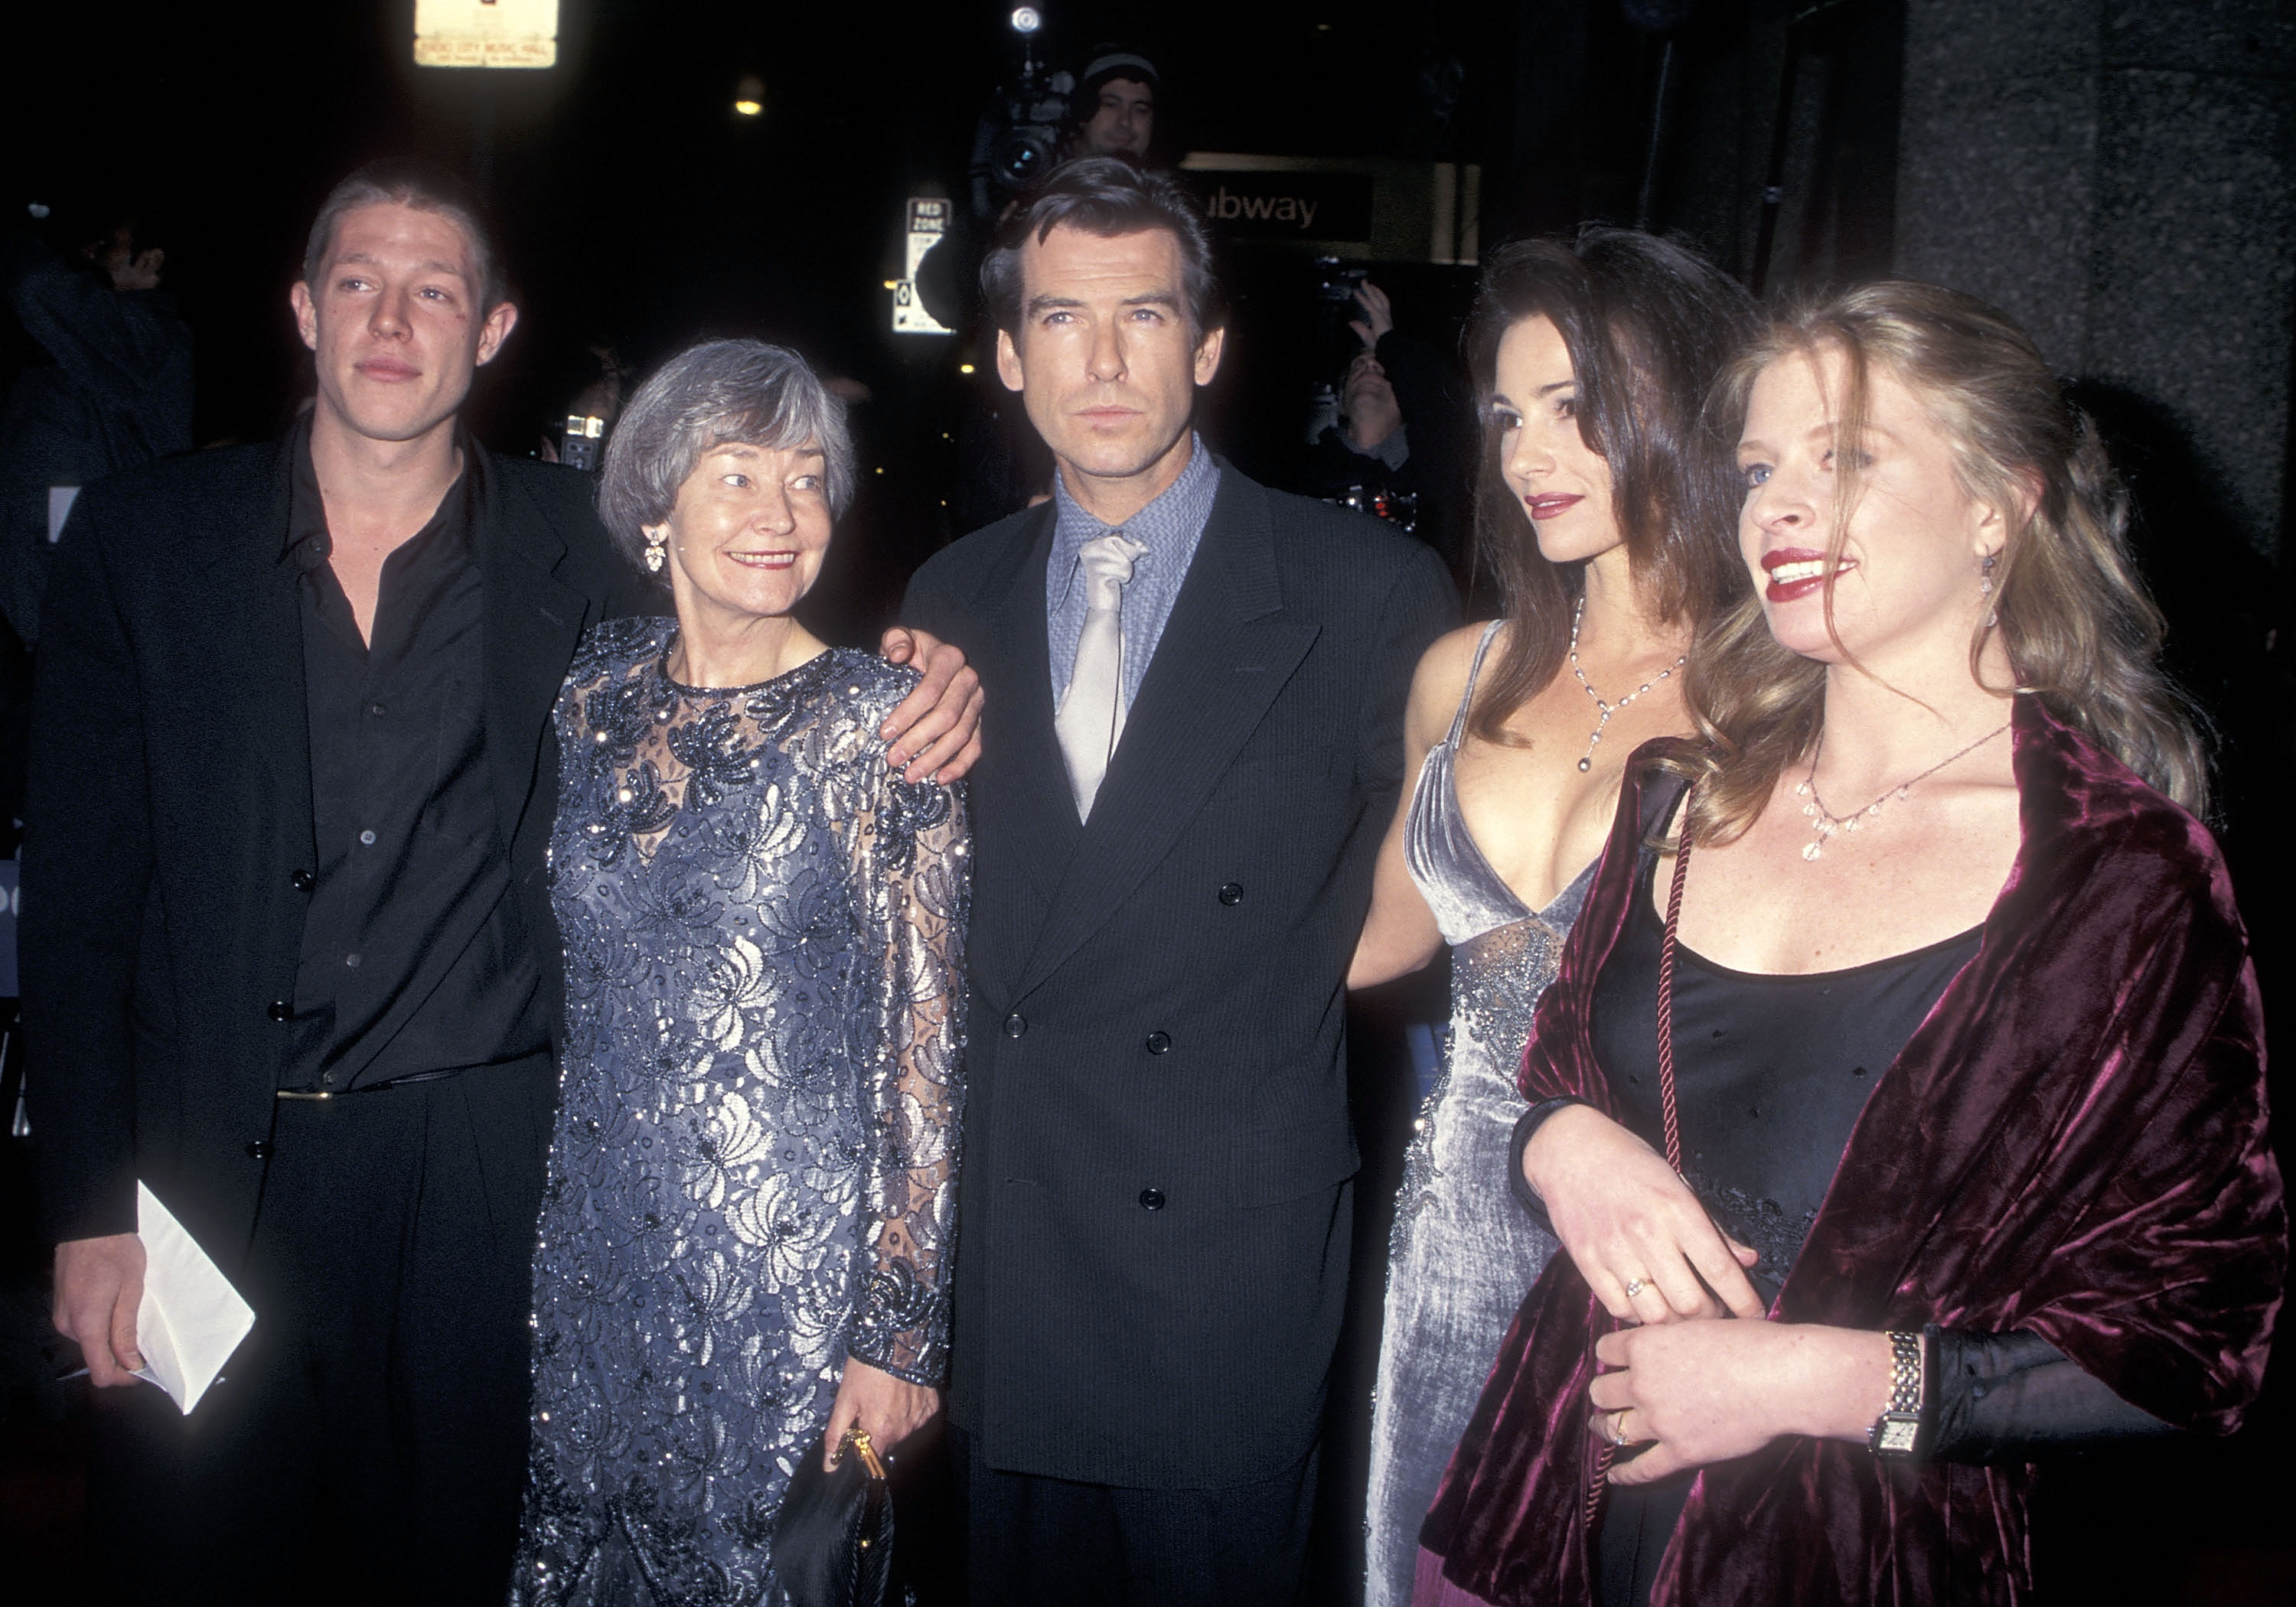 Pierce Brosnan, Keely Shaye Smith, son Christopher Brosnan, daughter Charlotte Brosnan, and mother May Smith at the "Goldeneye" NYC Premiere Party, November 13, 1995, Radio City Music Hall, New York City | Source: Getty Images